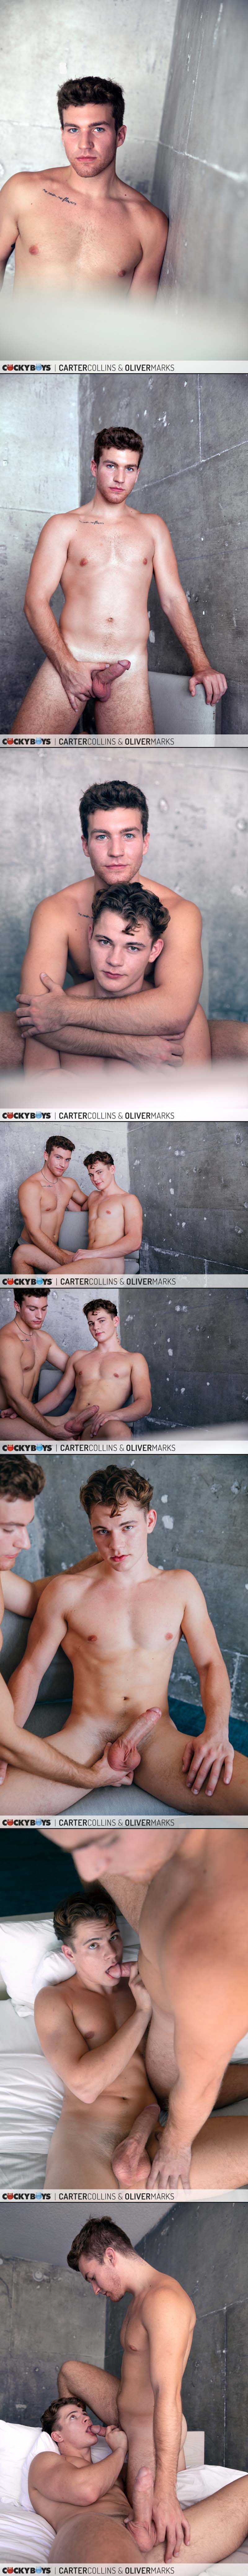 Real-Life BOYFRIENDS Carter Collins and Oliver Marks at CockyBoys